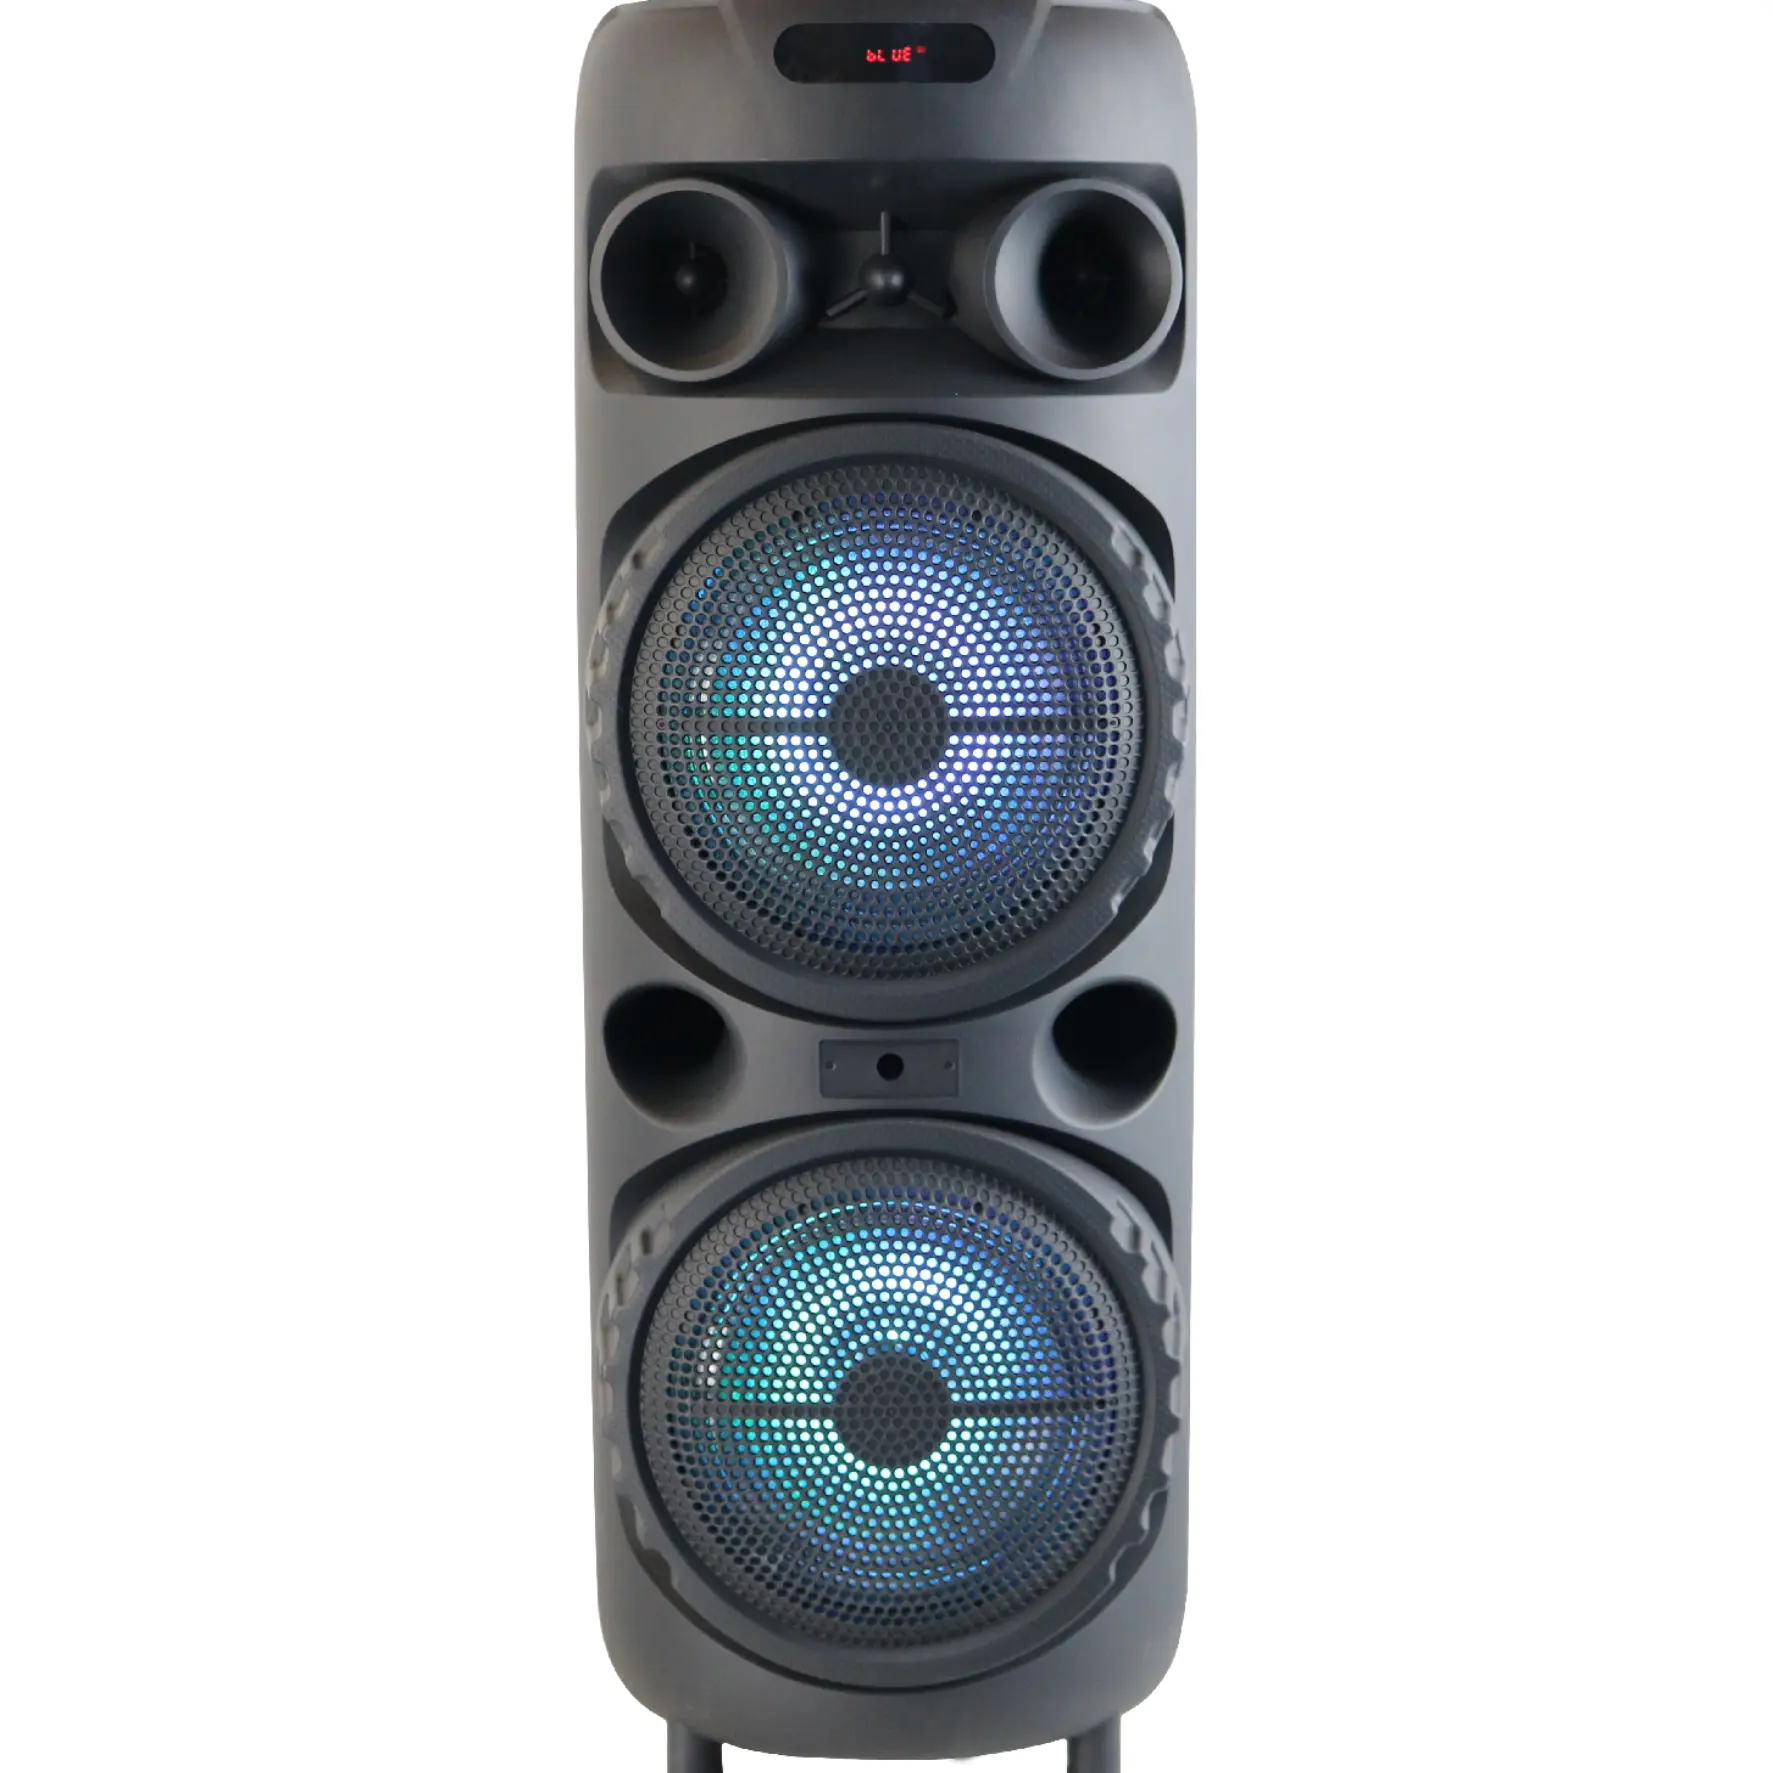 Hot Selling Party Speaker Double 8 Inch Sound Box with Wireless Microphone